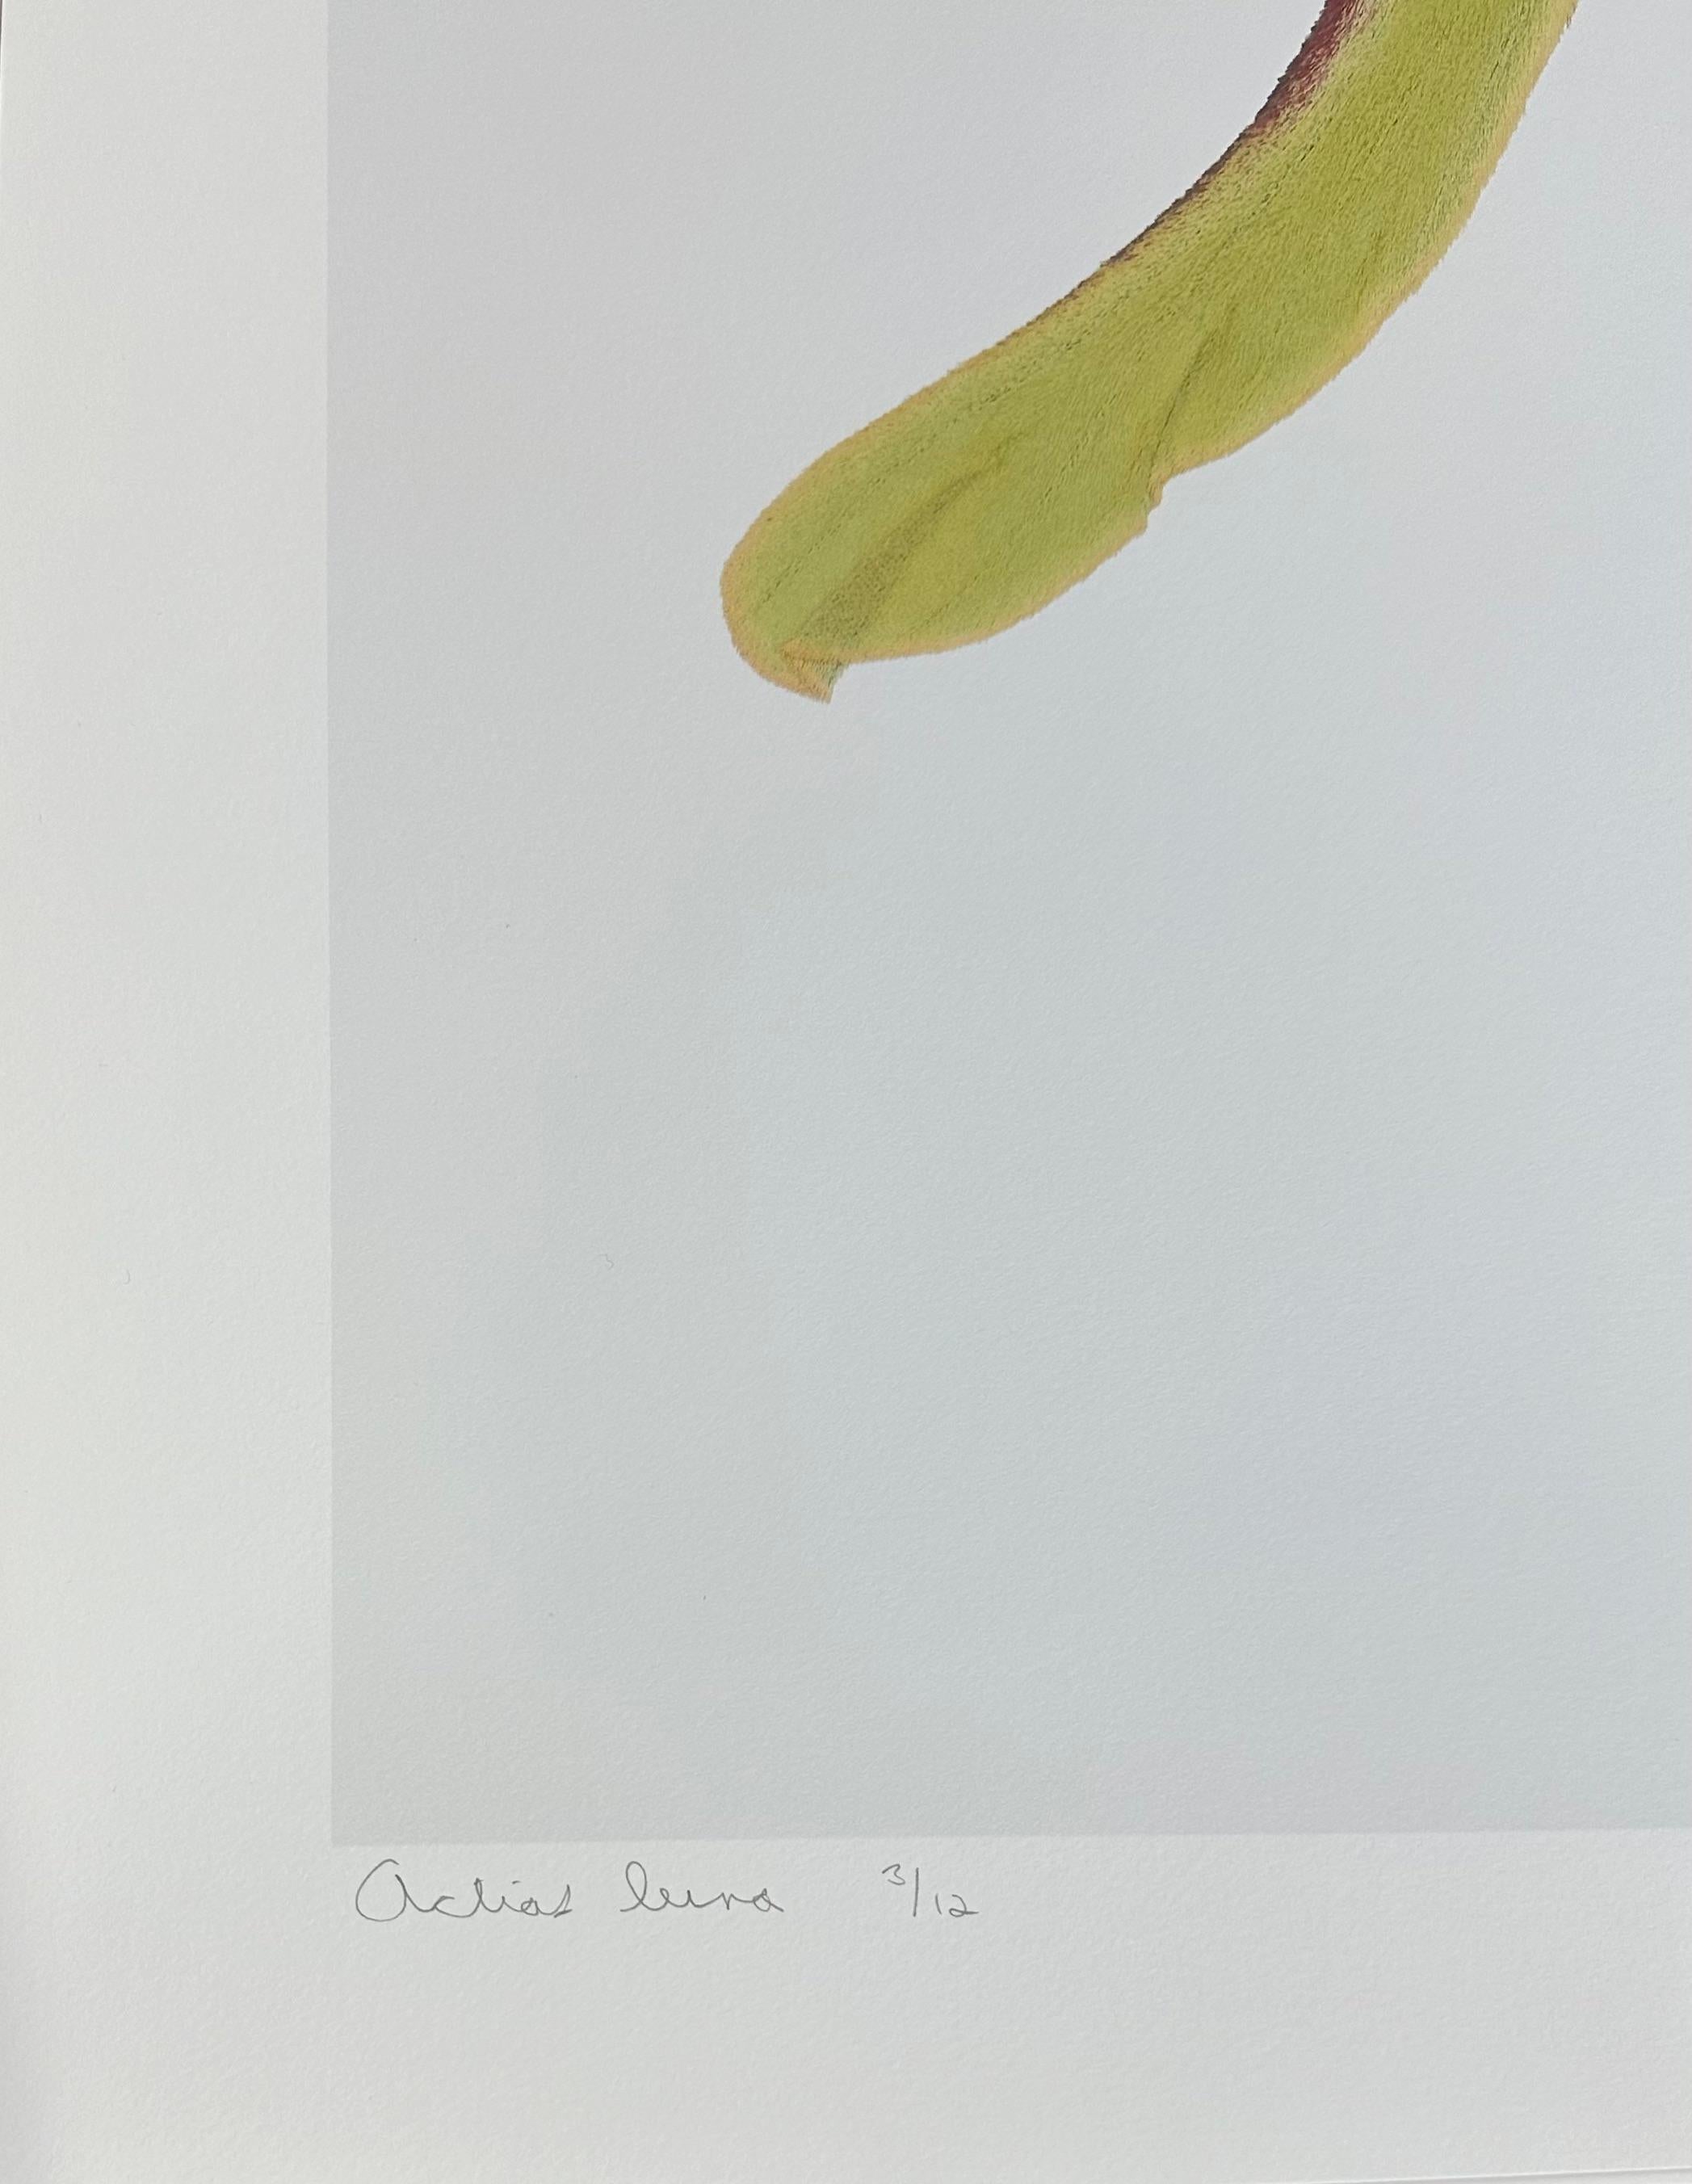 In this hyper-detailed archival pigment print on watercolor paper, a light green luna moth with brown circular markings on its wings and a fuzzy yellow abdomen is dramatic against a solid white background. 

Price shown is the unframed price. Please